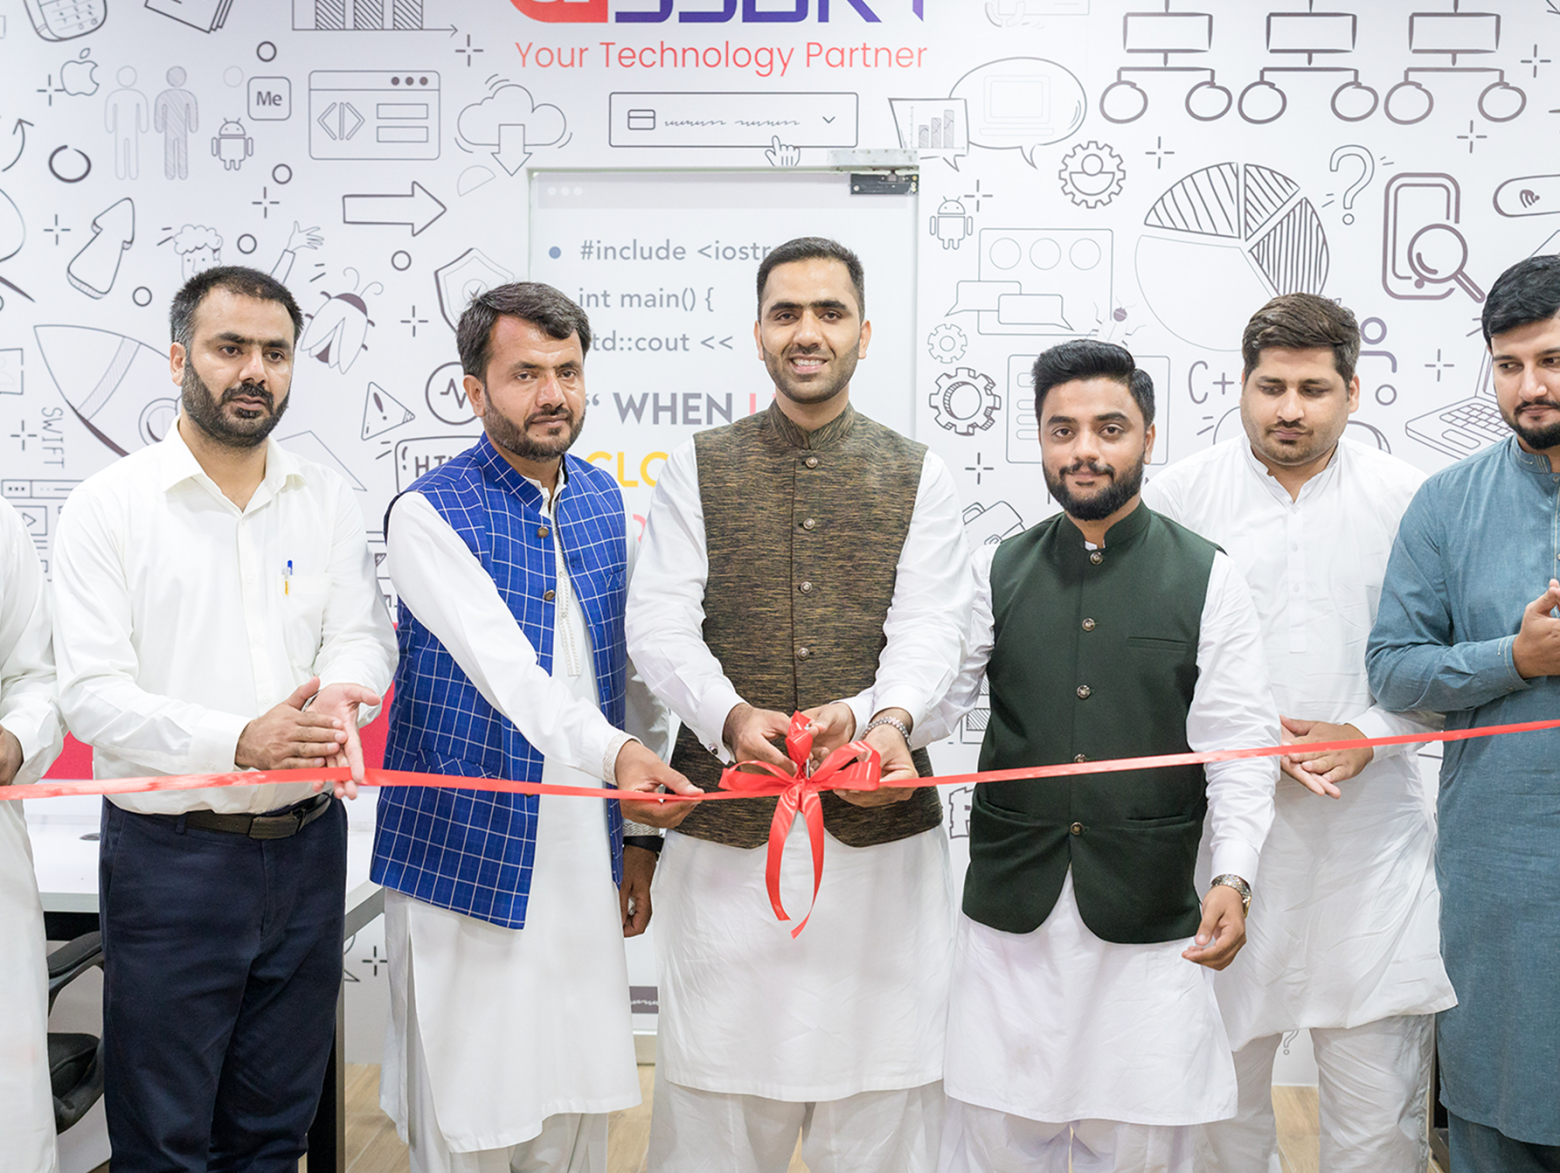 Inauguration Ceremony AssortTech Acquired a new office